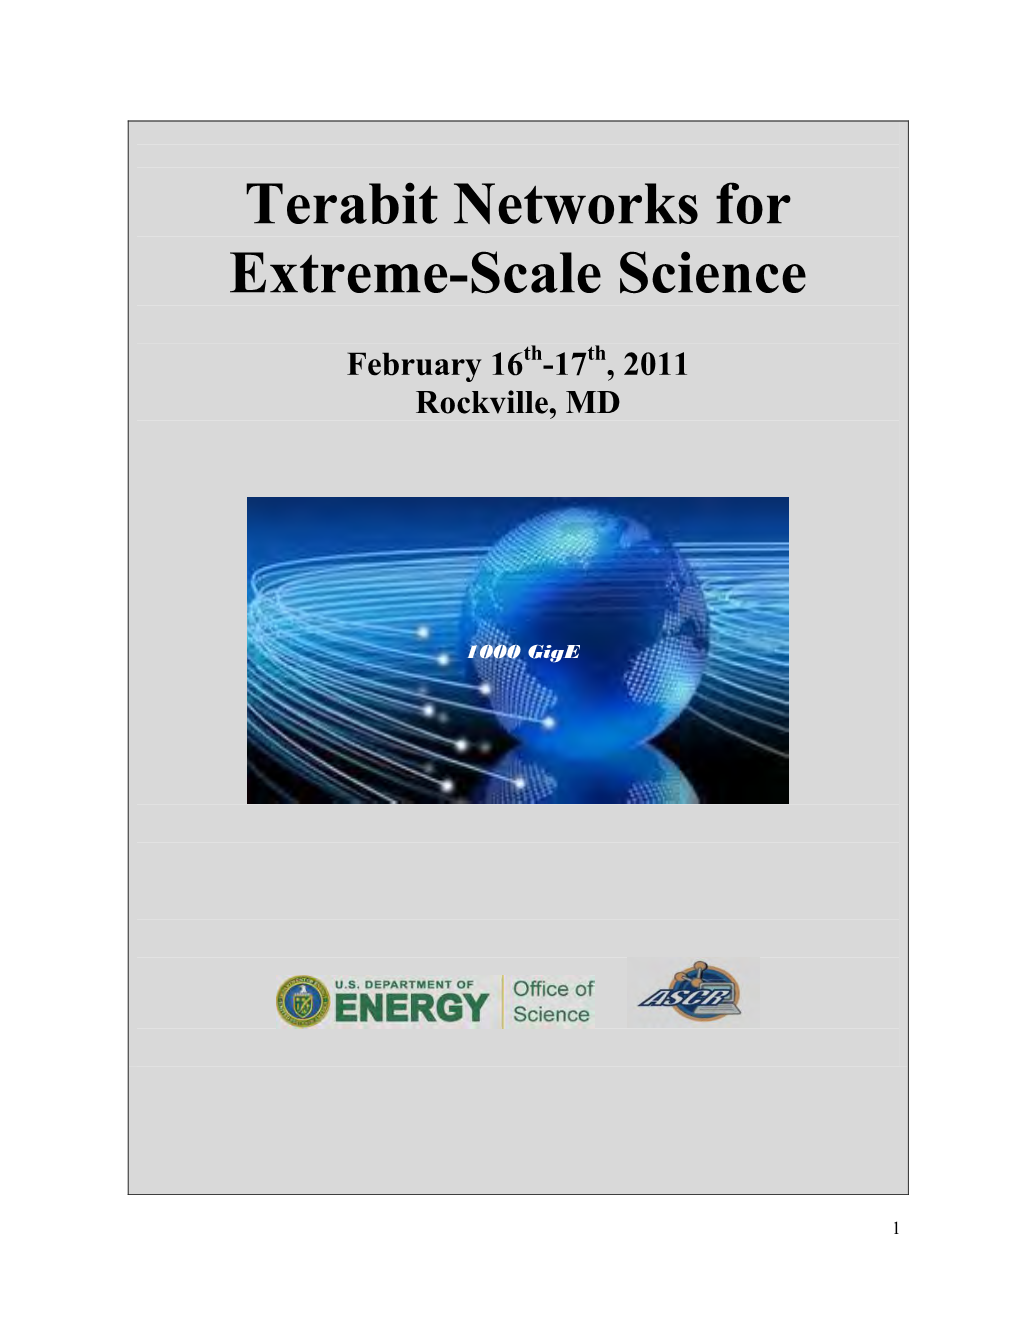 Terabit Networks for Extreme-Scale Science